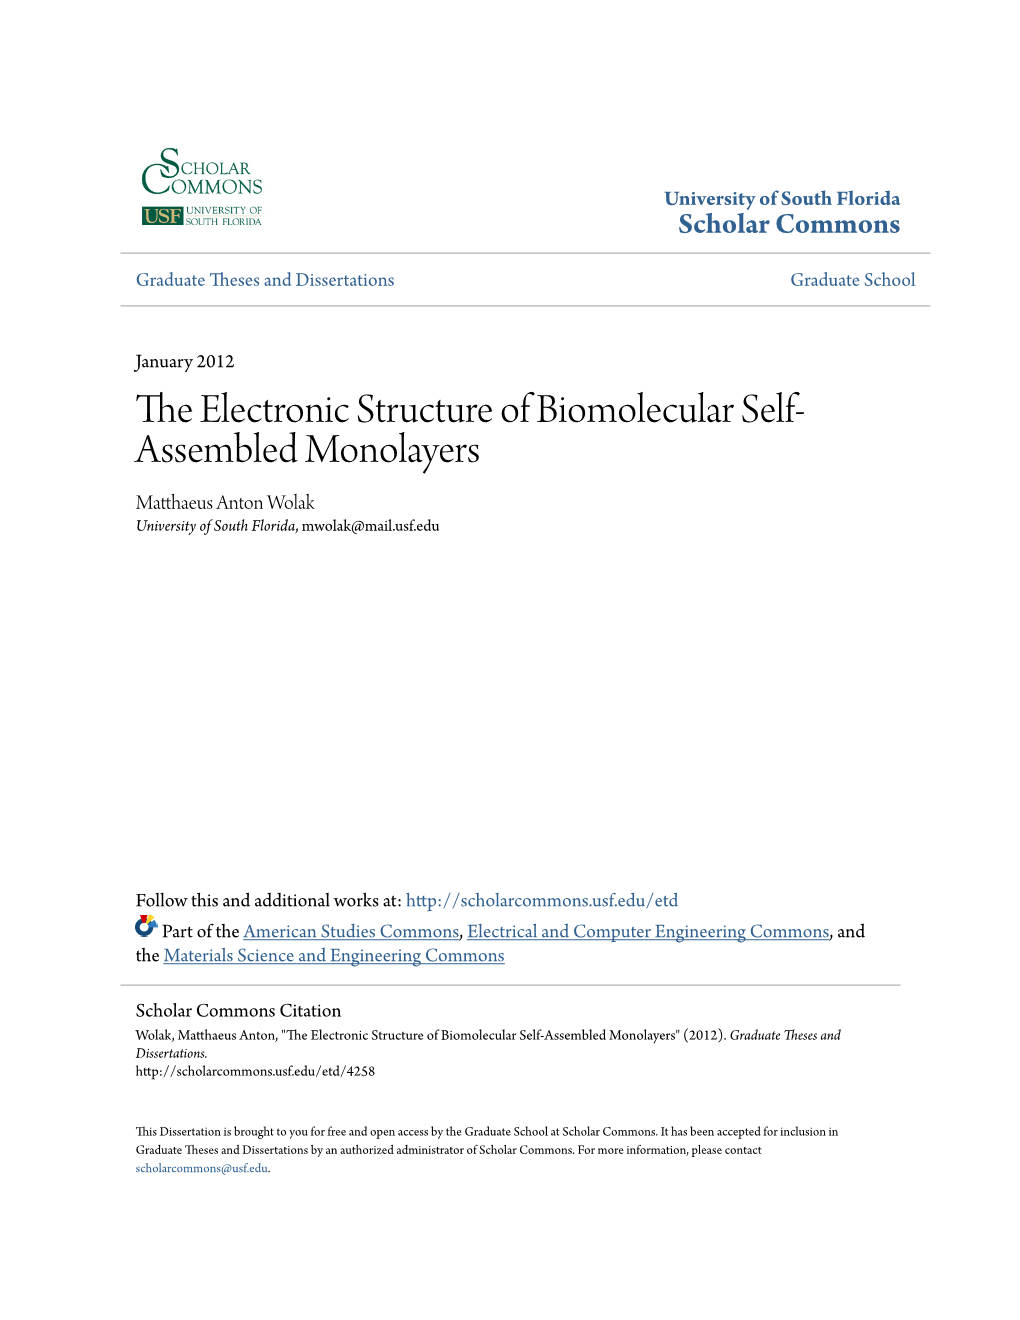 The Electronic Structure of Biomolecular Self-Assembled Monolayers" (2012)